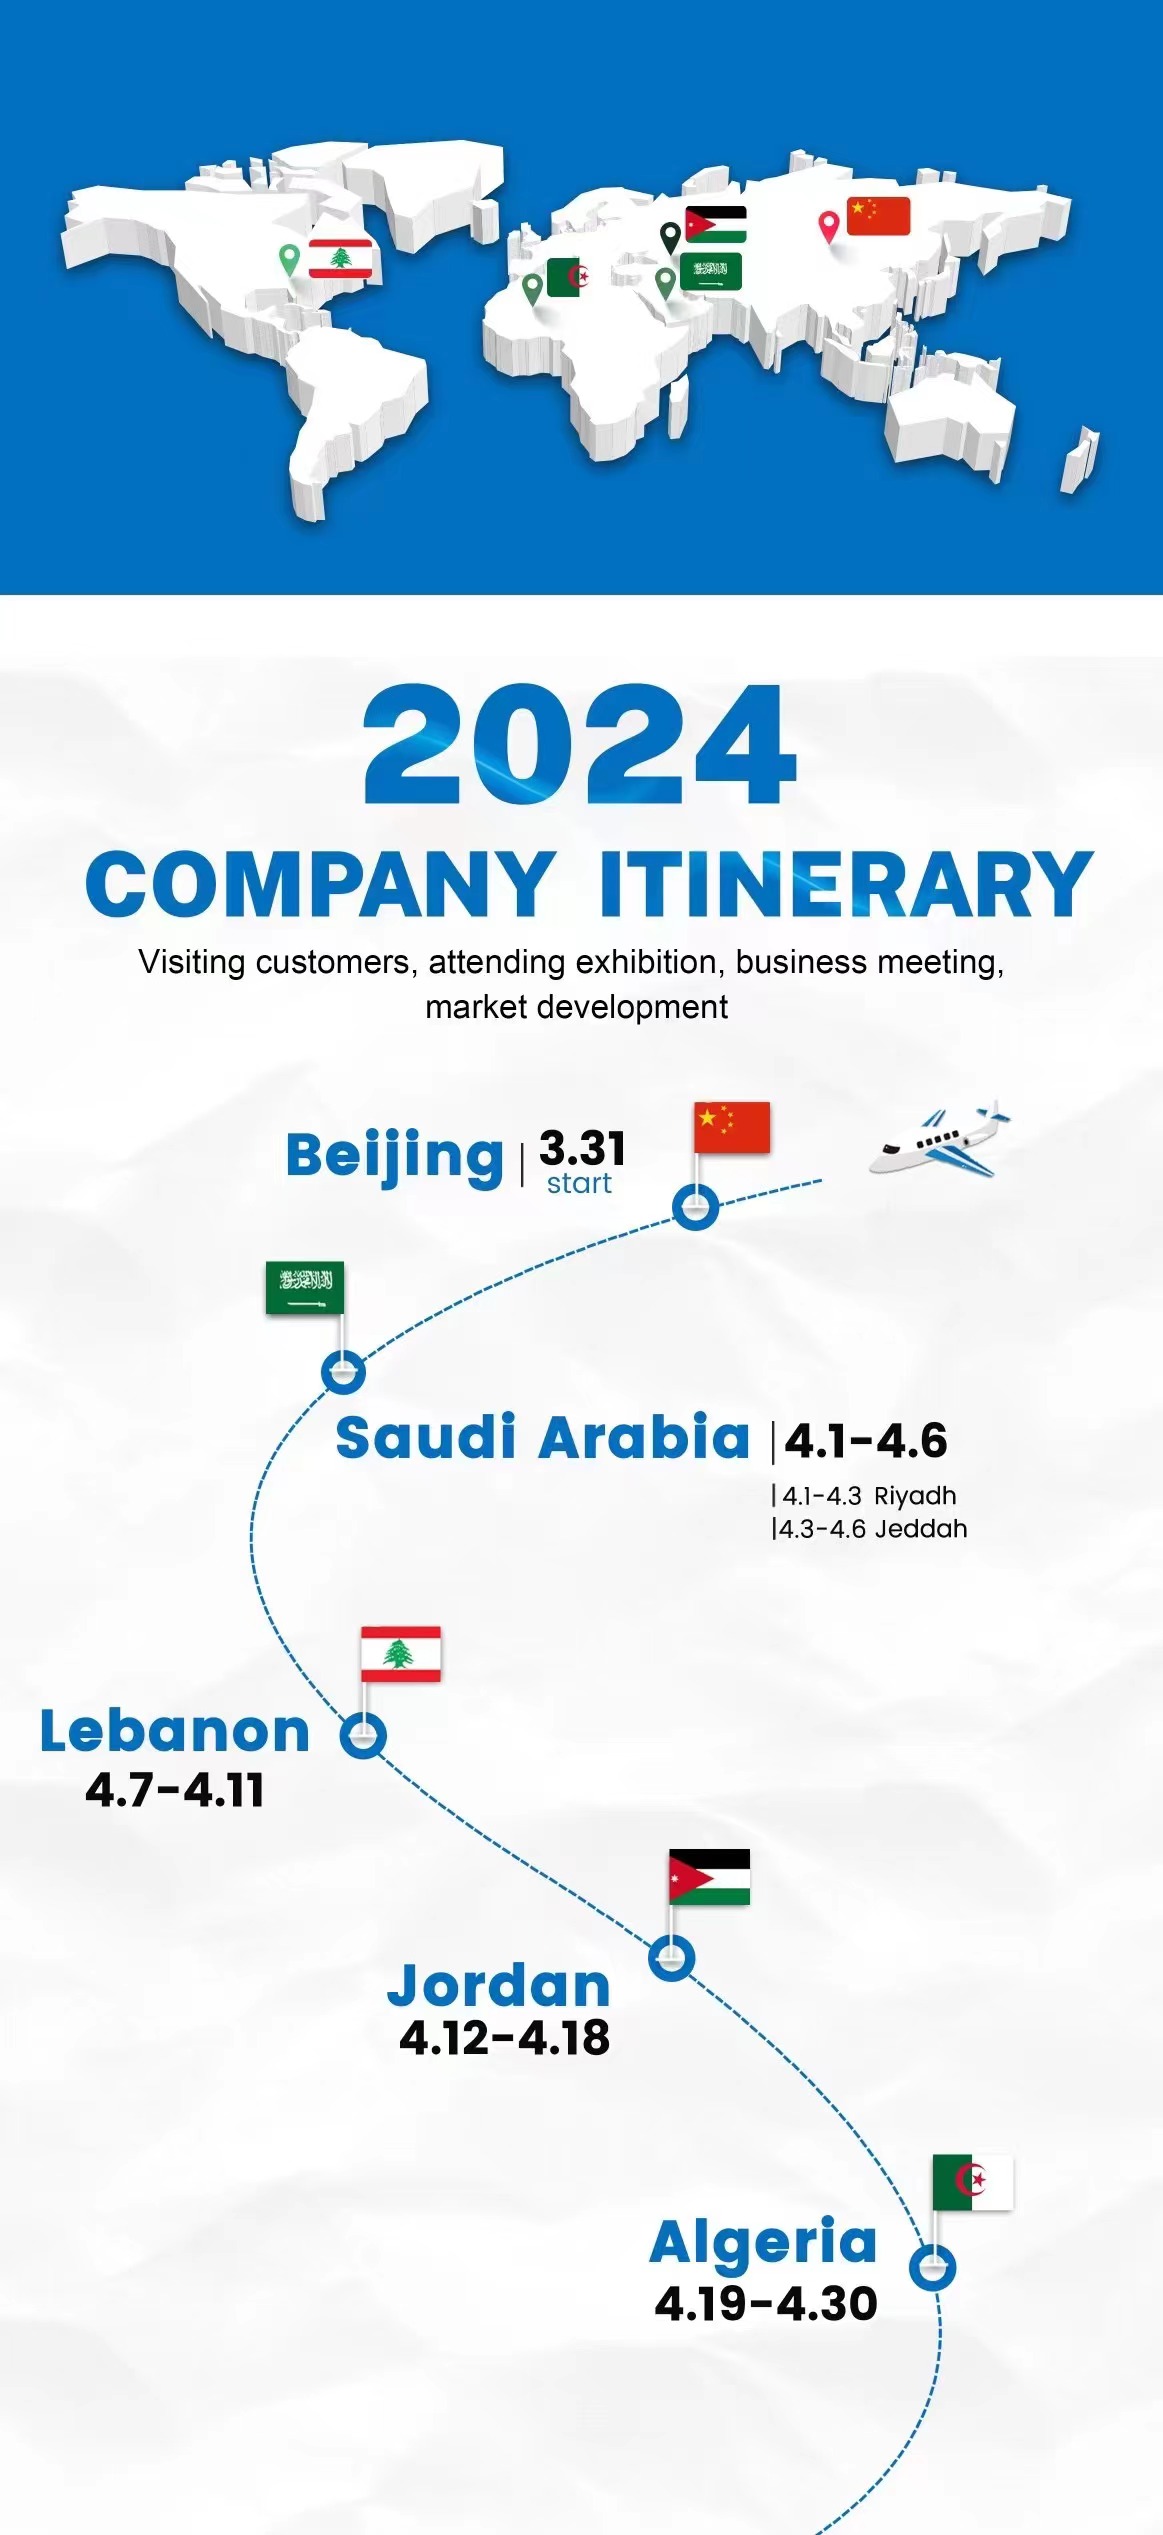 Company's April Visit Itinerary in The Middle East And Algeria